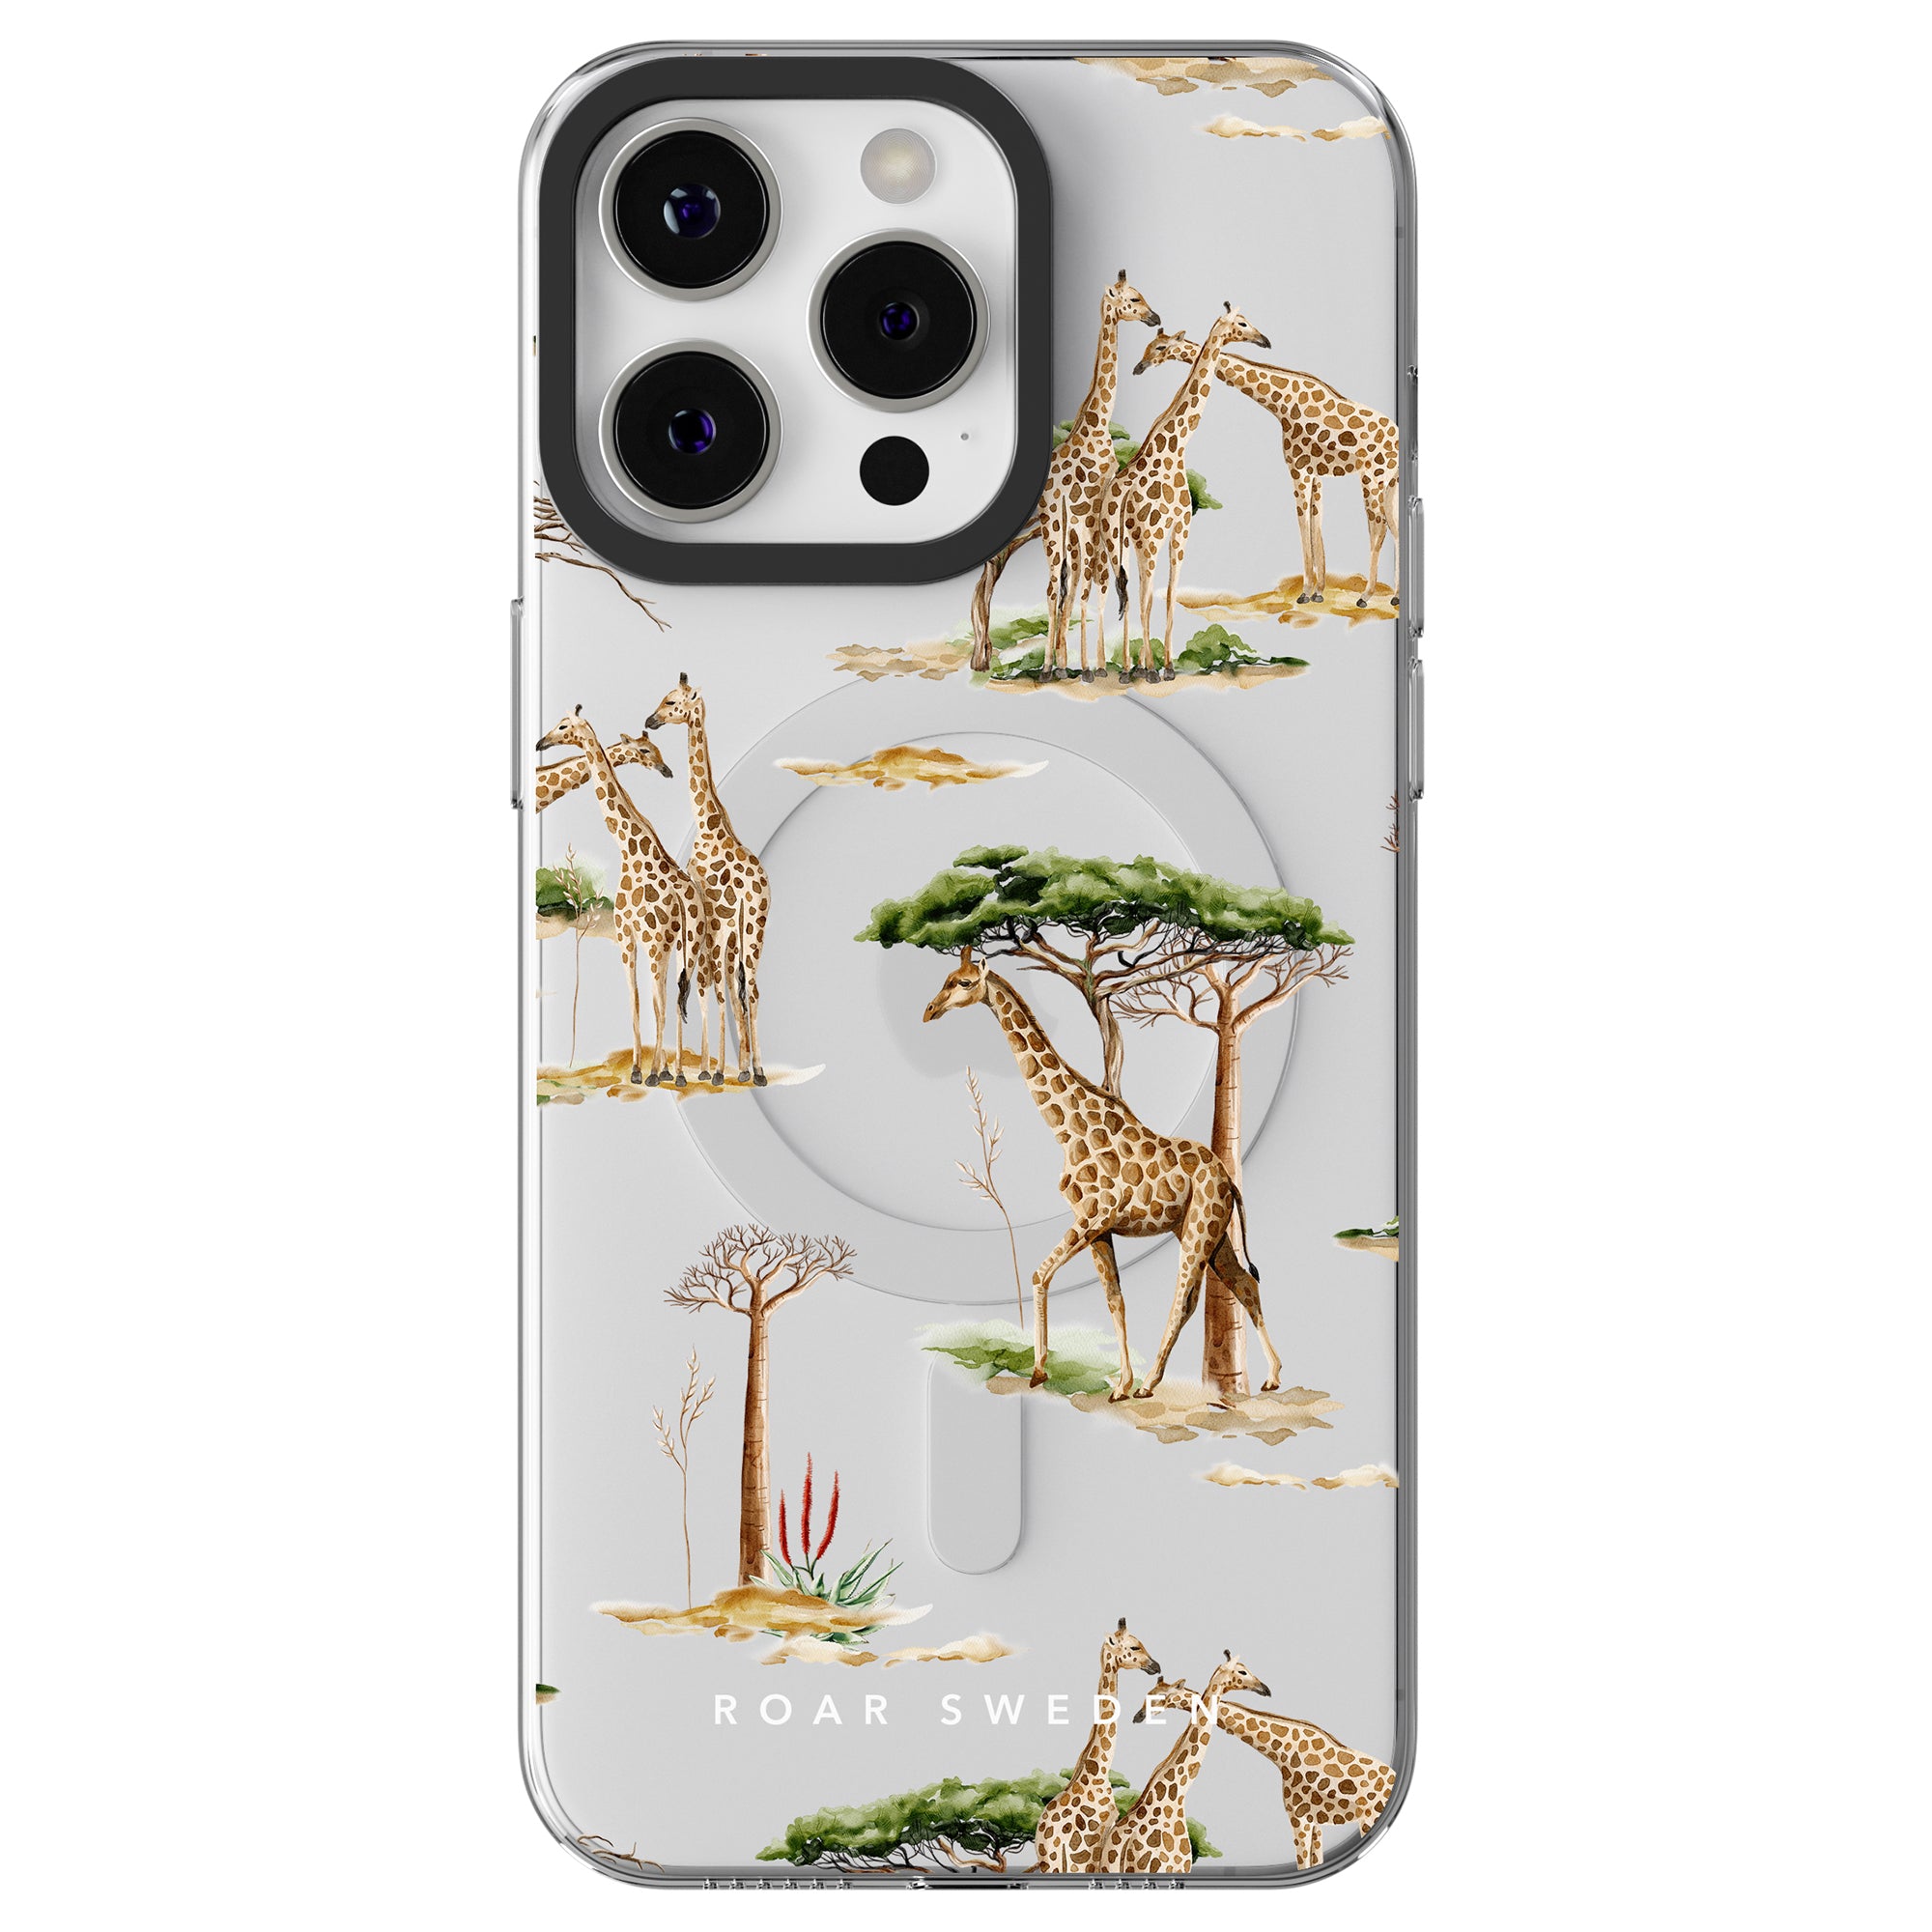 A clear phone case featuring an illustration of giraffes in various poses among scattered trees and shrubs. Part of the Giraffa - MagSafe by ROAR Sweden, this case beautifully blends nature with whimsical charm.